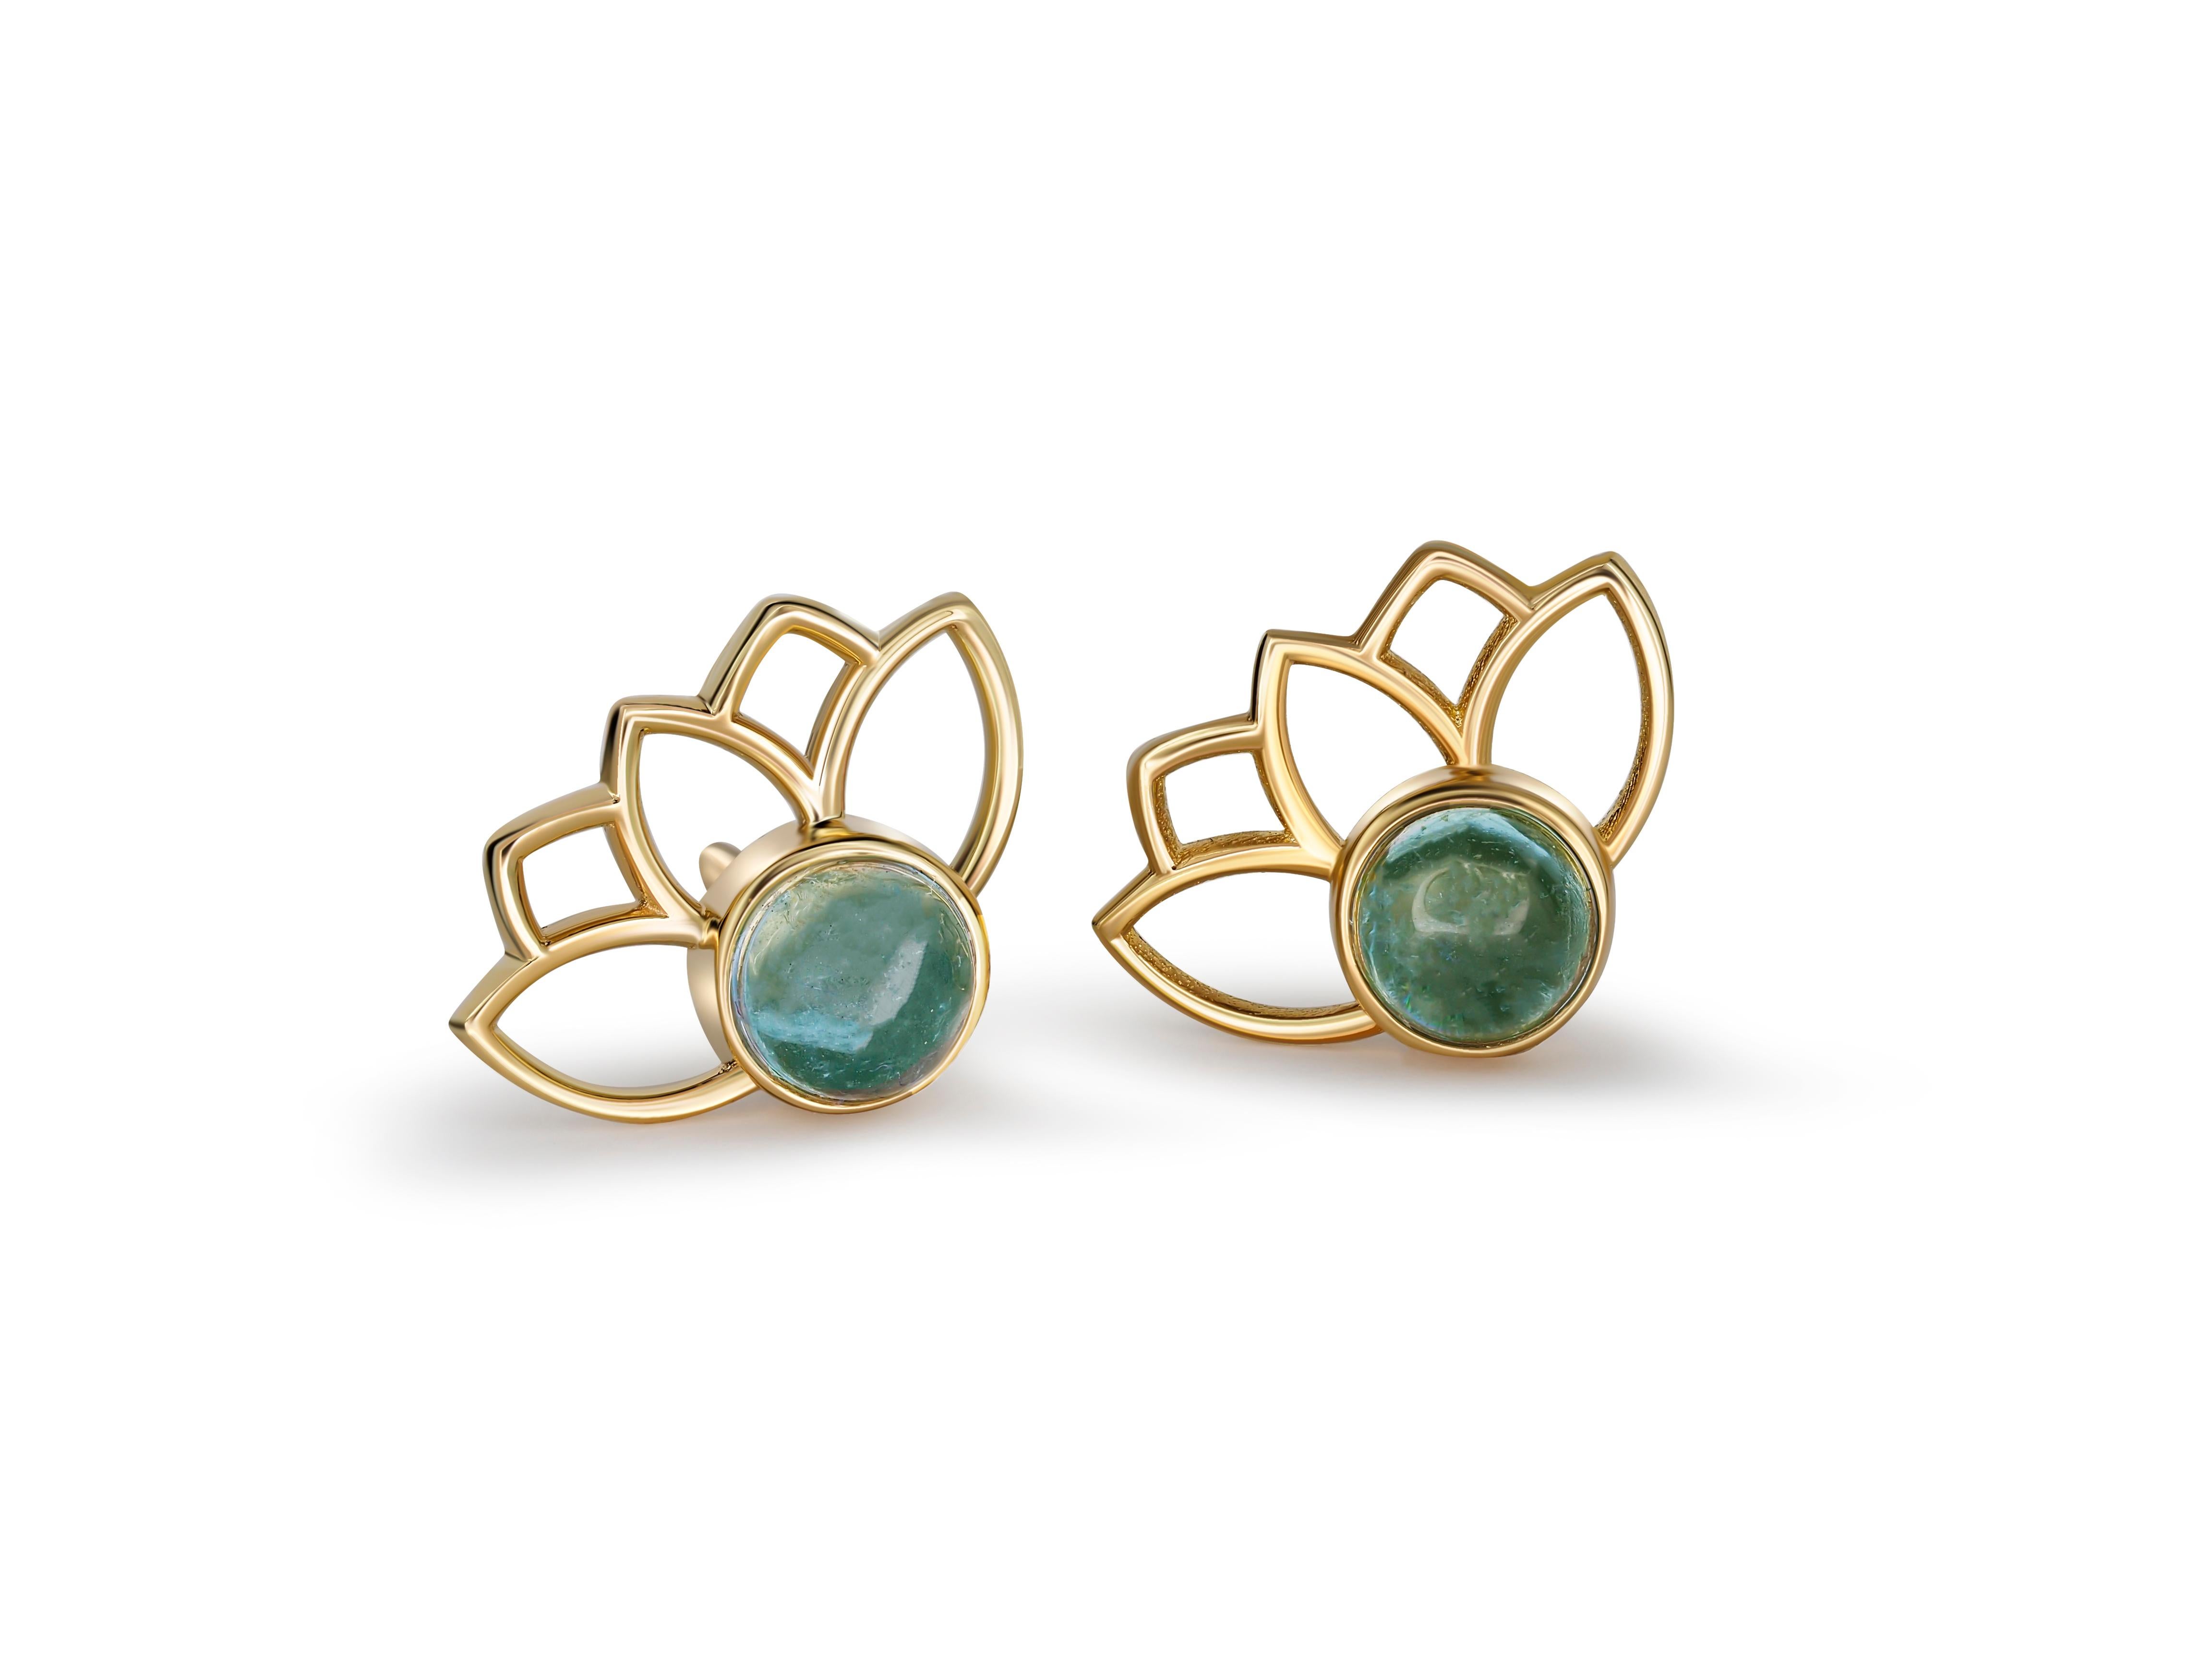 Lotus earrings studs with aquamarines in 14k gold. Aquamarine cab earrings 

Metal: 14 karat gold
Weight: 1.2 g.
Size: 11.45 x 8.35 mm.
Set with genuine  aquamarines: weight - 0.45 ct x 2 = 0.90 ct total.
Light blue color, cabochon cut, clarity good